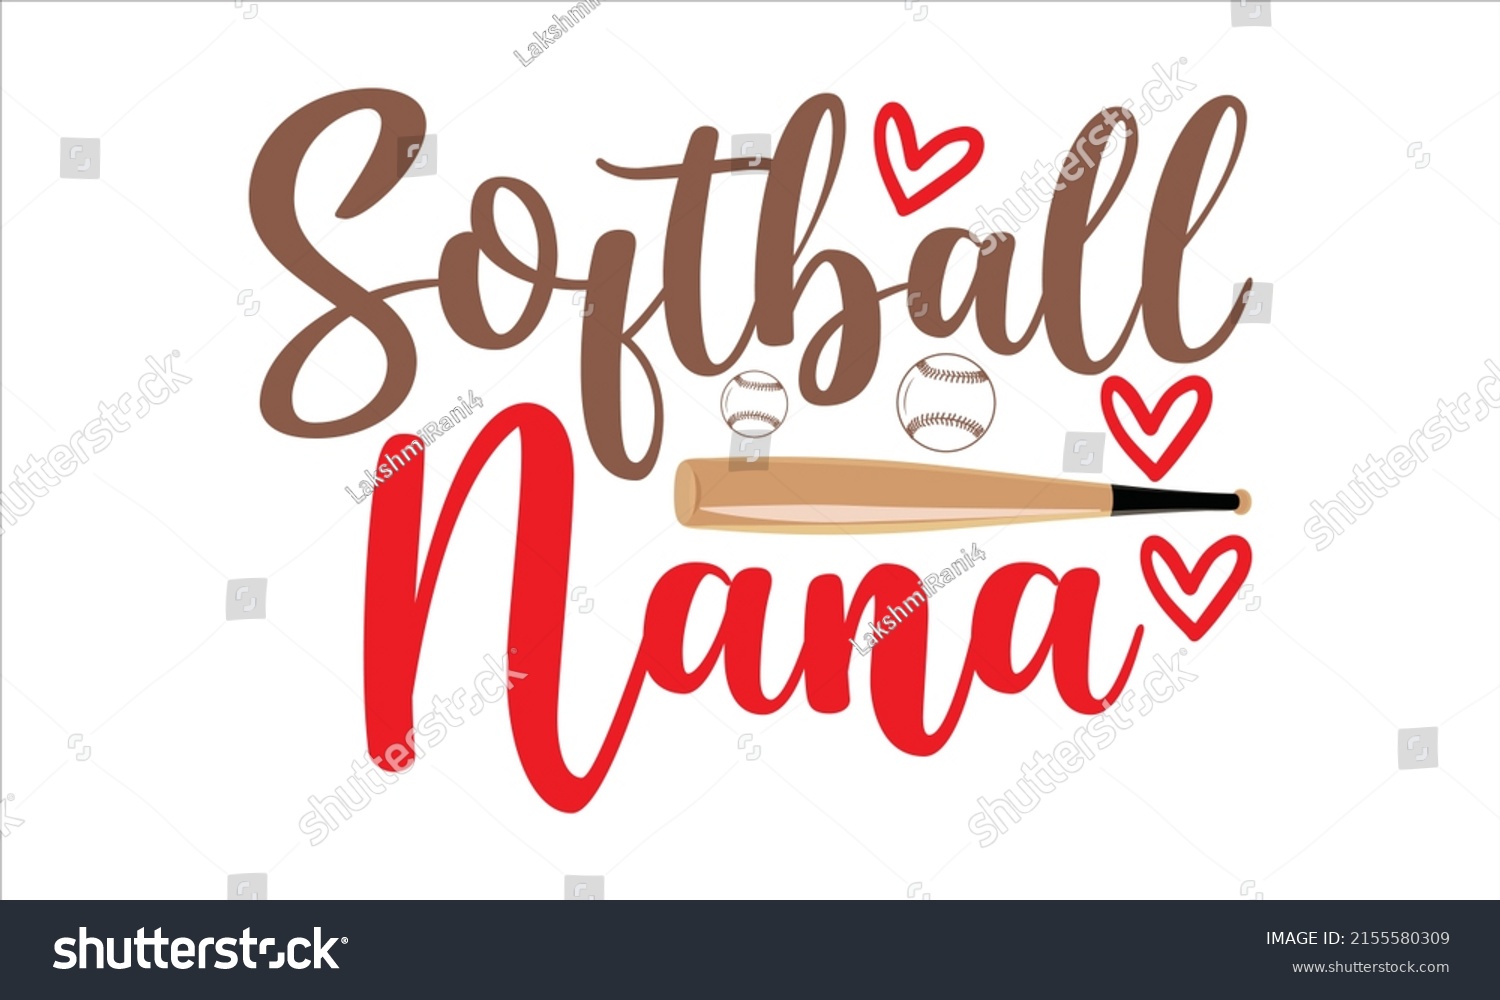 SVG of   Softball Nana -   Lettering design for greeting banners, Mouse Pads, Prints, Cards and Posters, Mugs, Notebooks, Floor Pillows and T-shirt prints design.
 svg